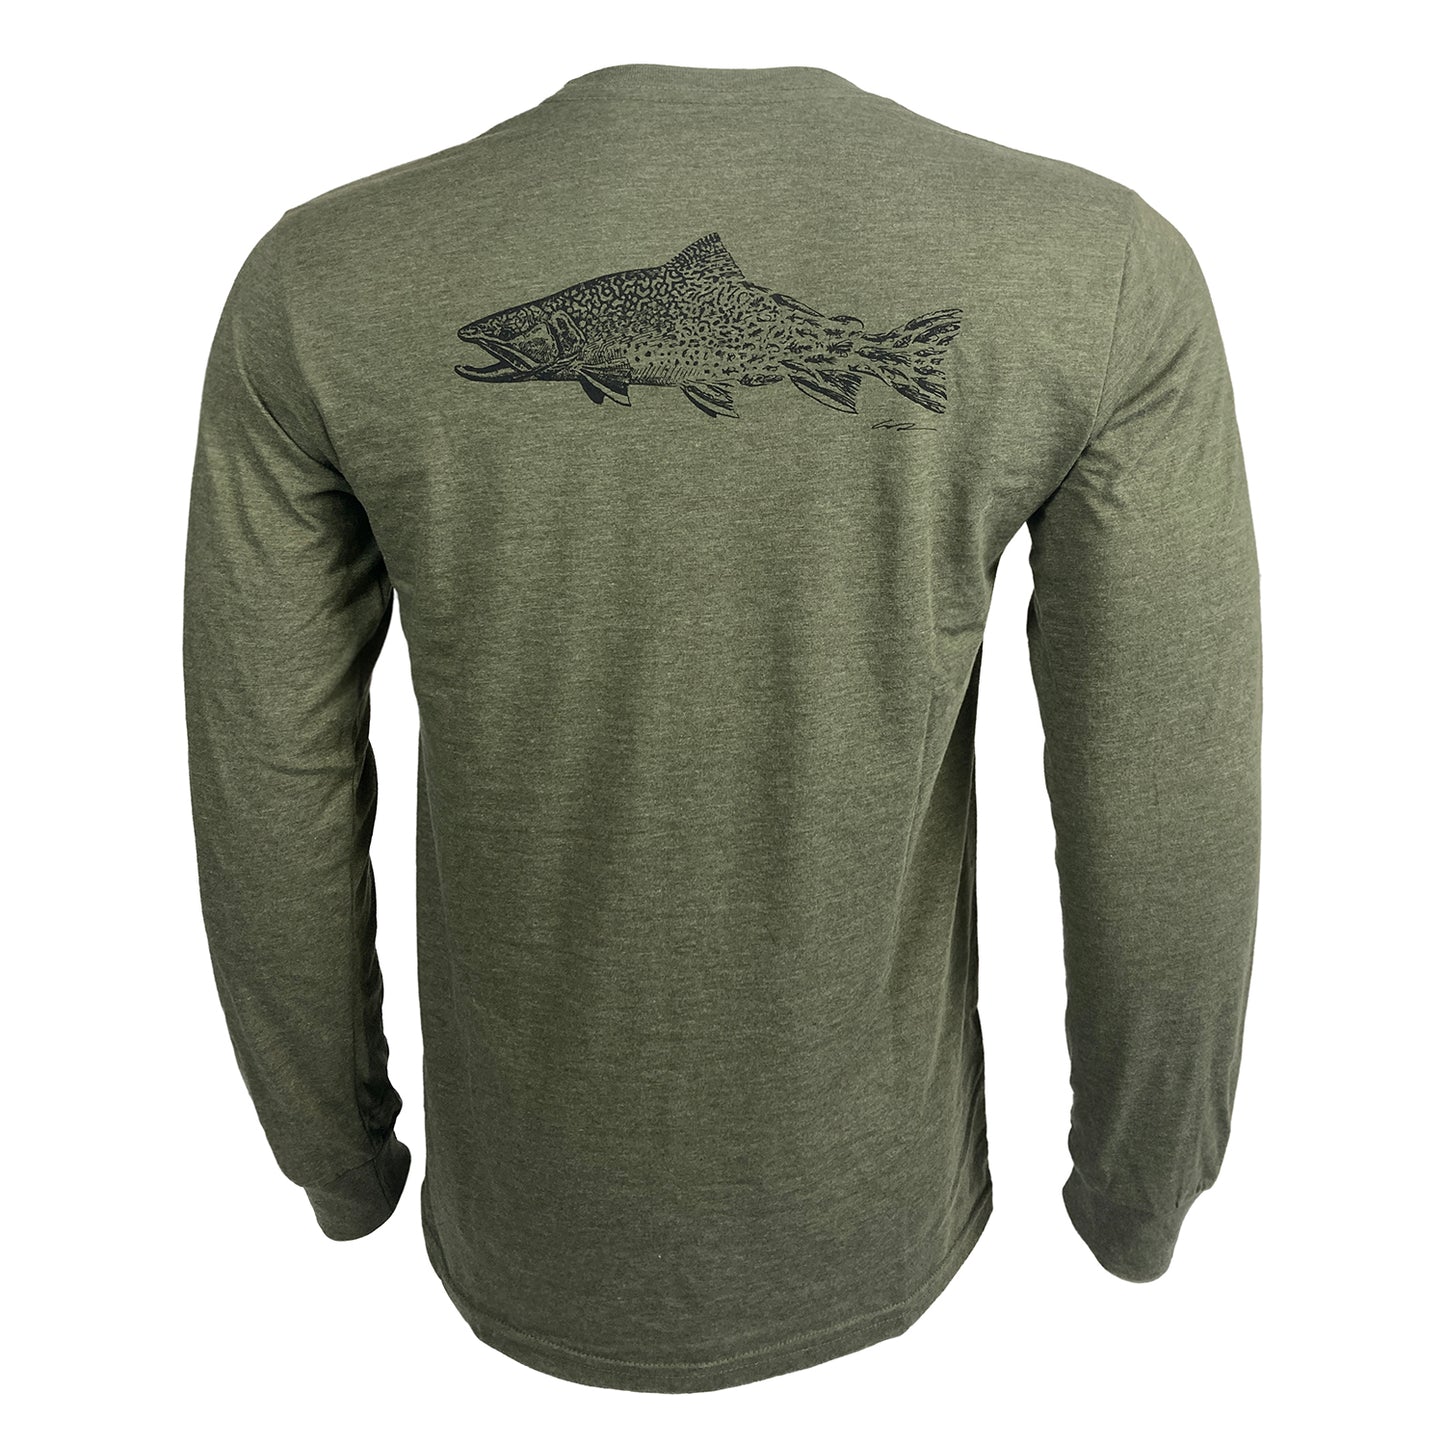 Green long sleeved tee shown from the back with artistically rendered brook trout fading into flies across the shoulder blades.